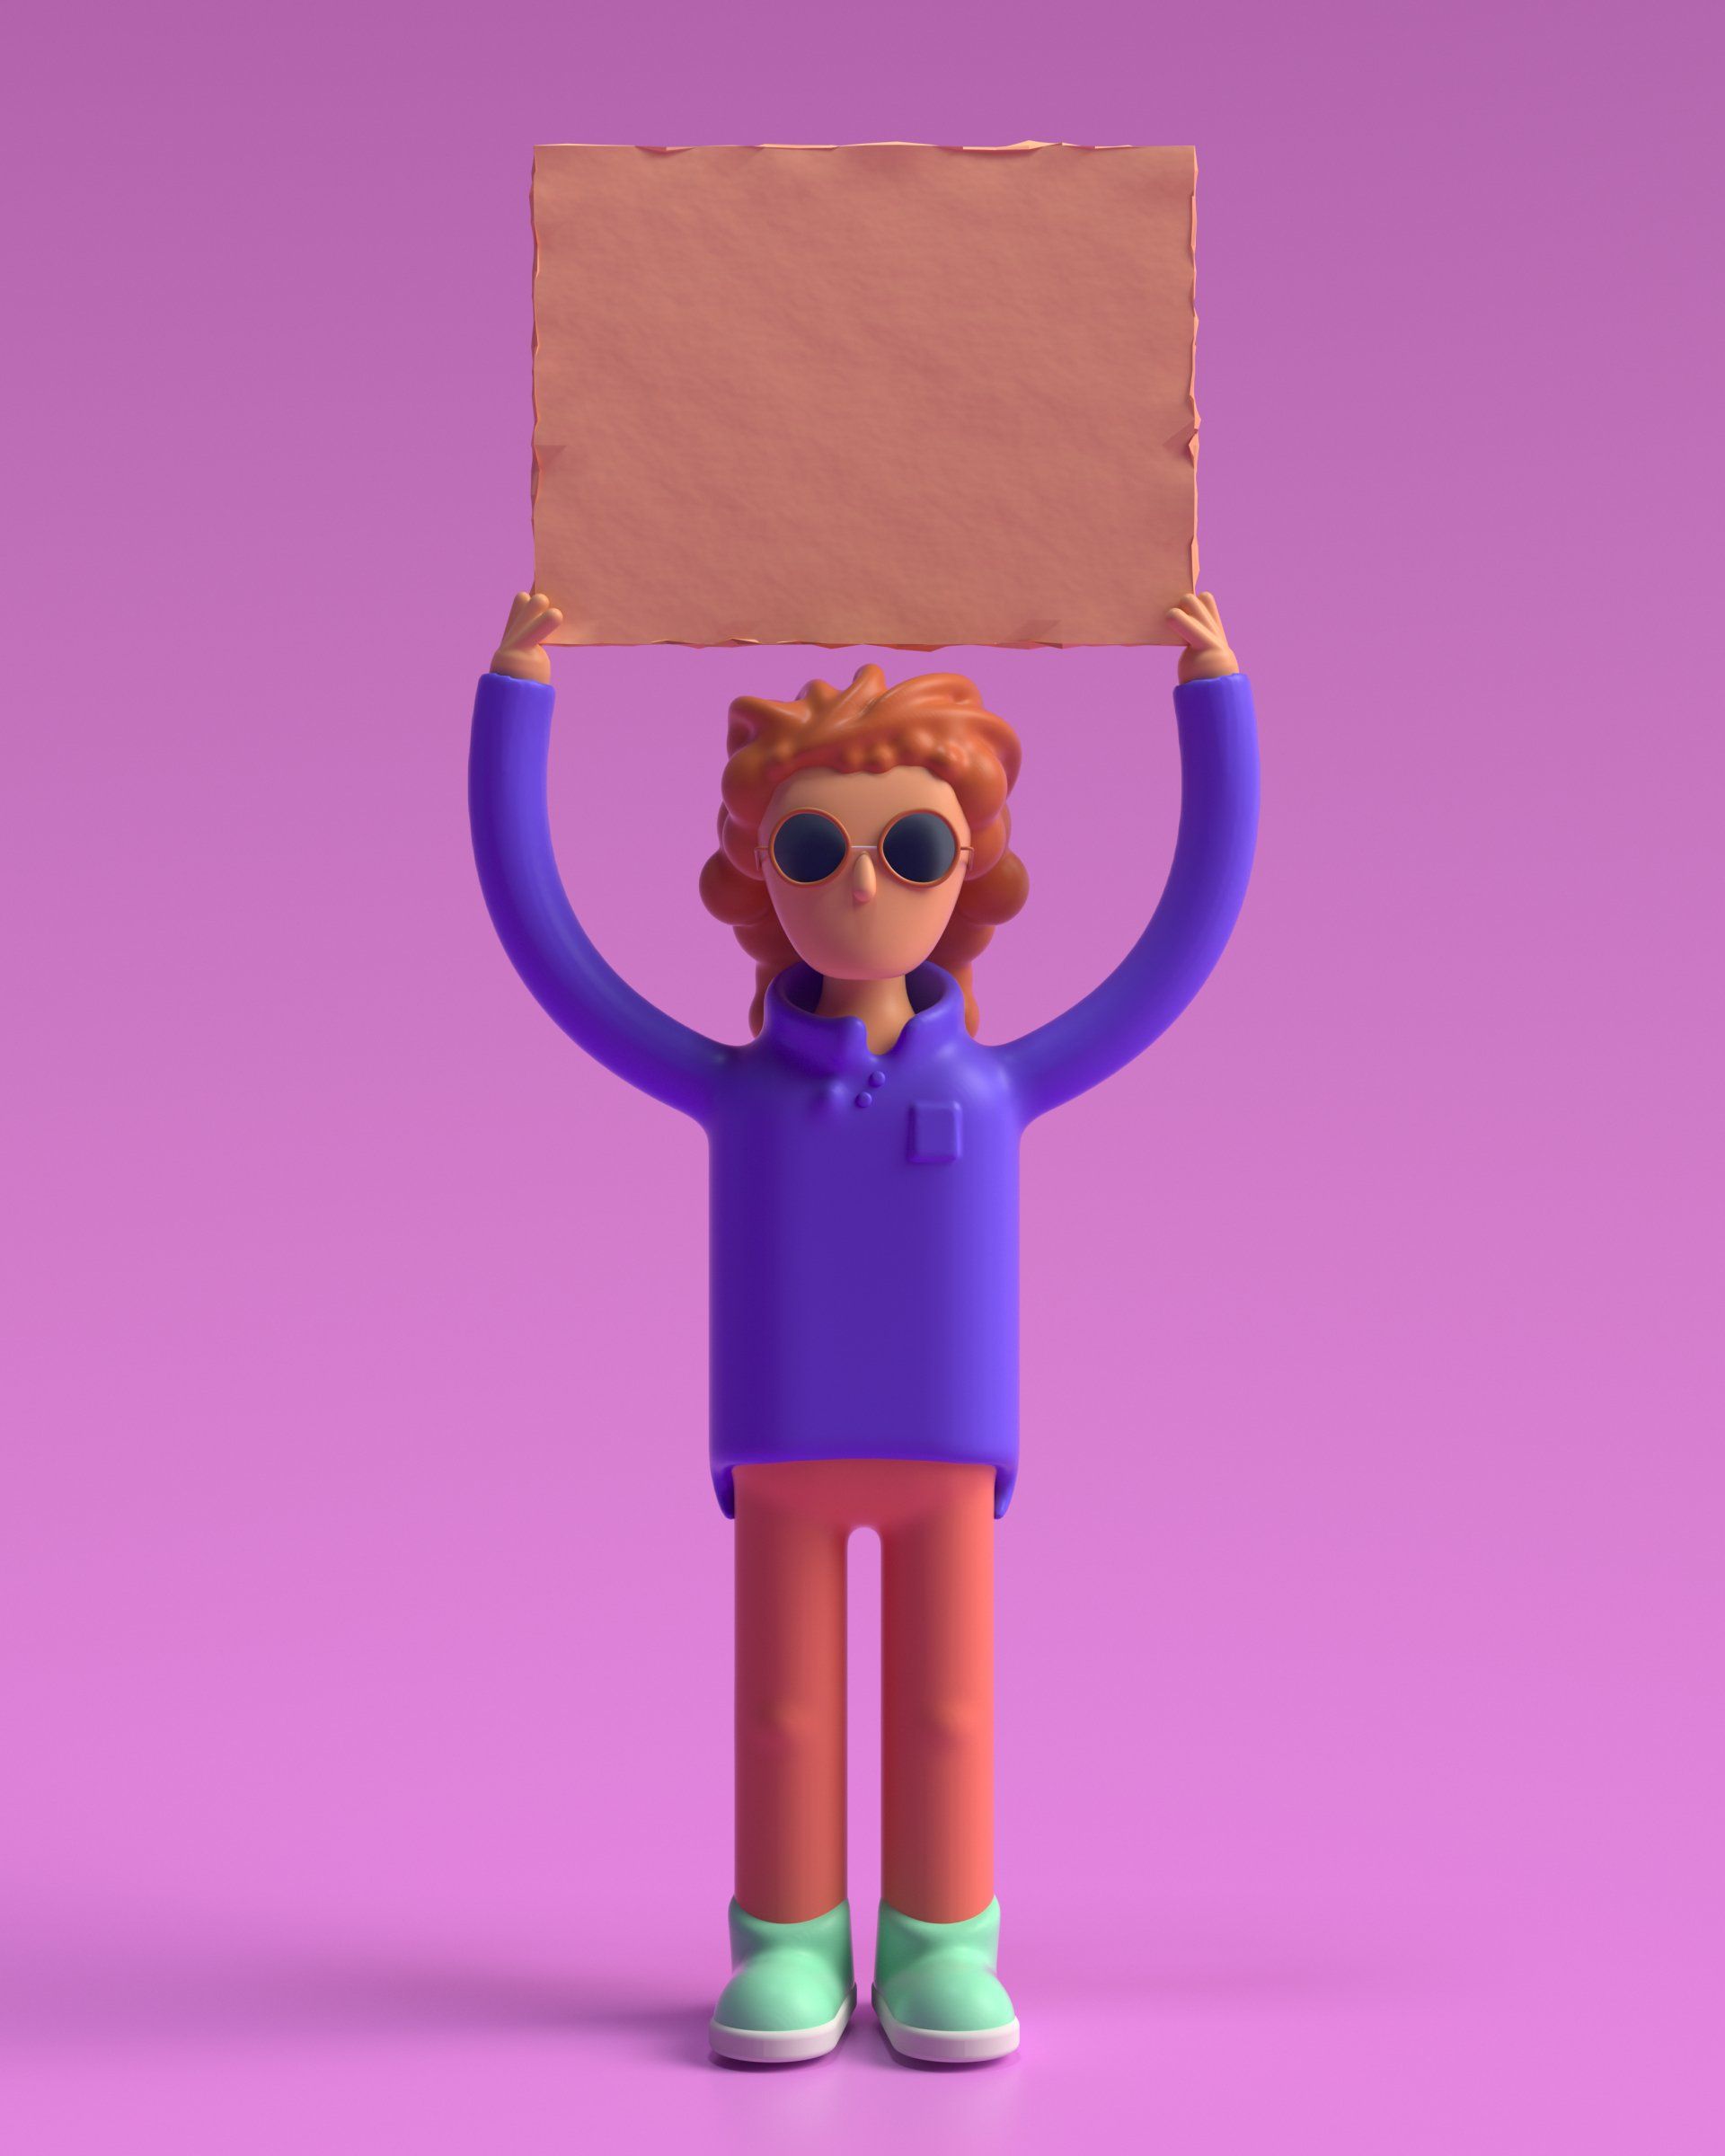 a cartoon character is holding a cardboard sign over his head .